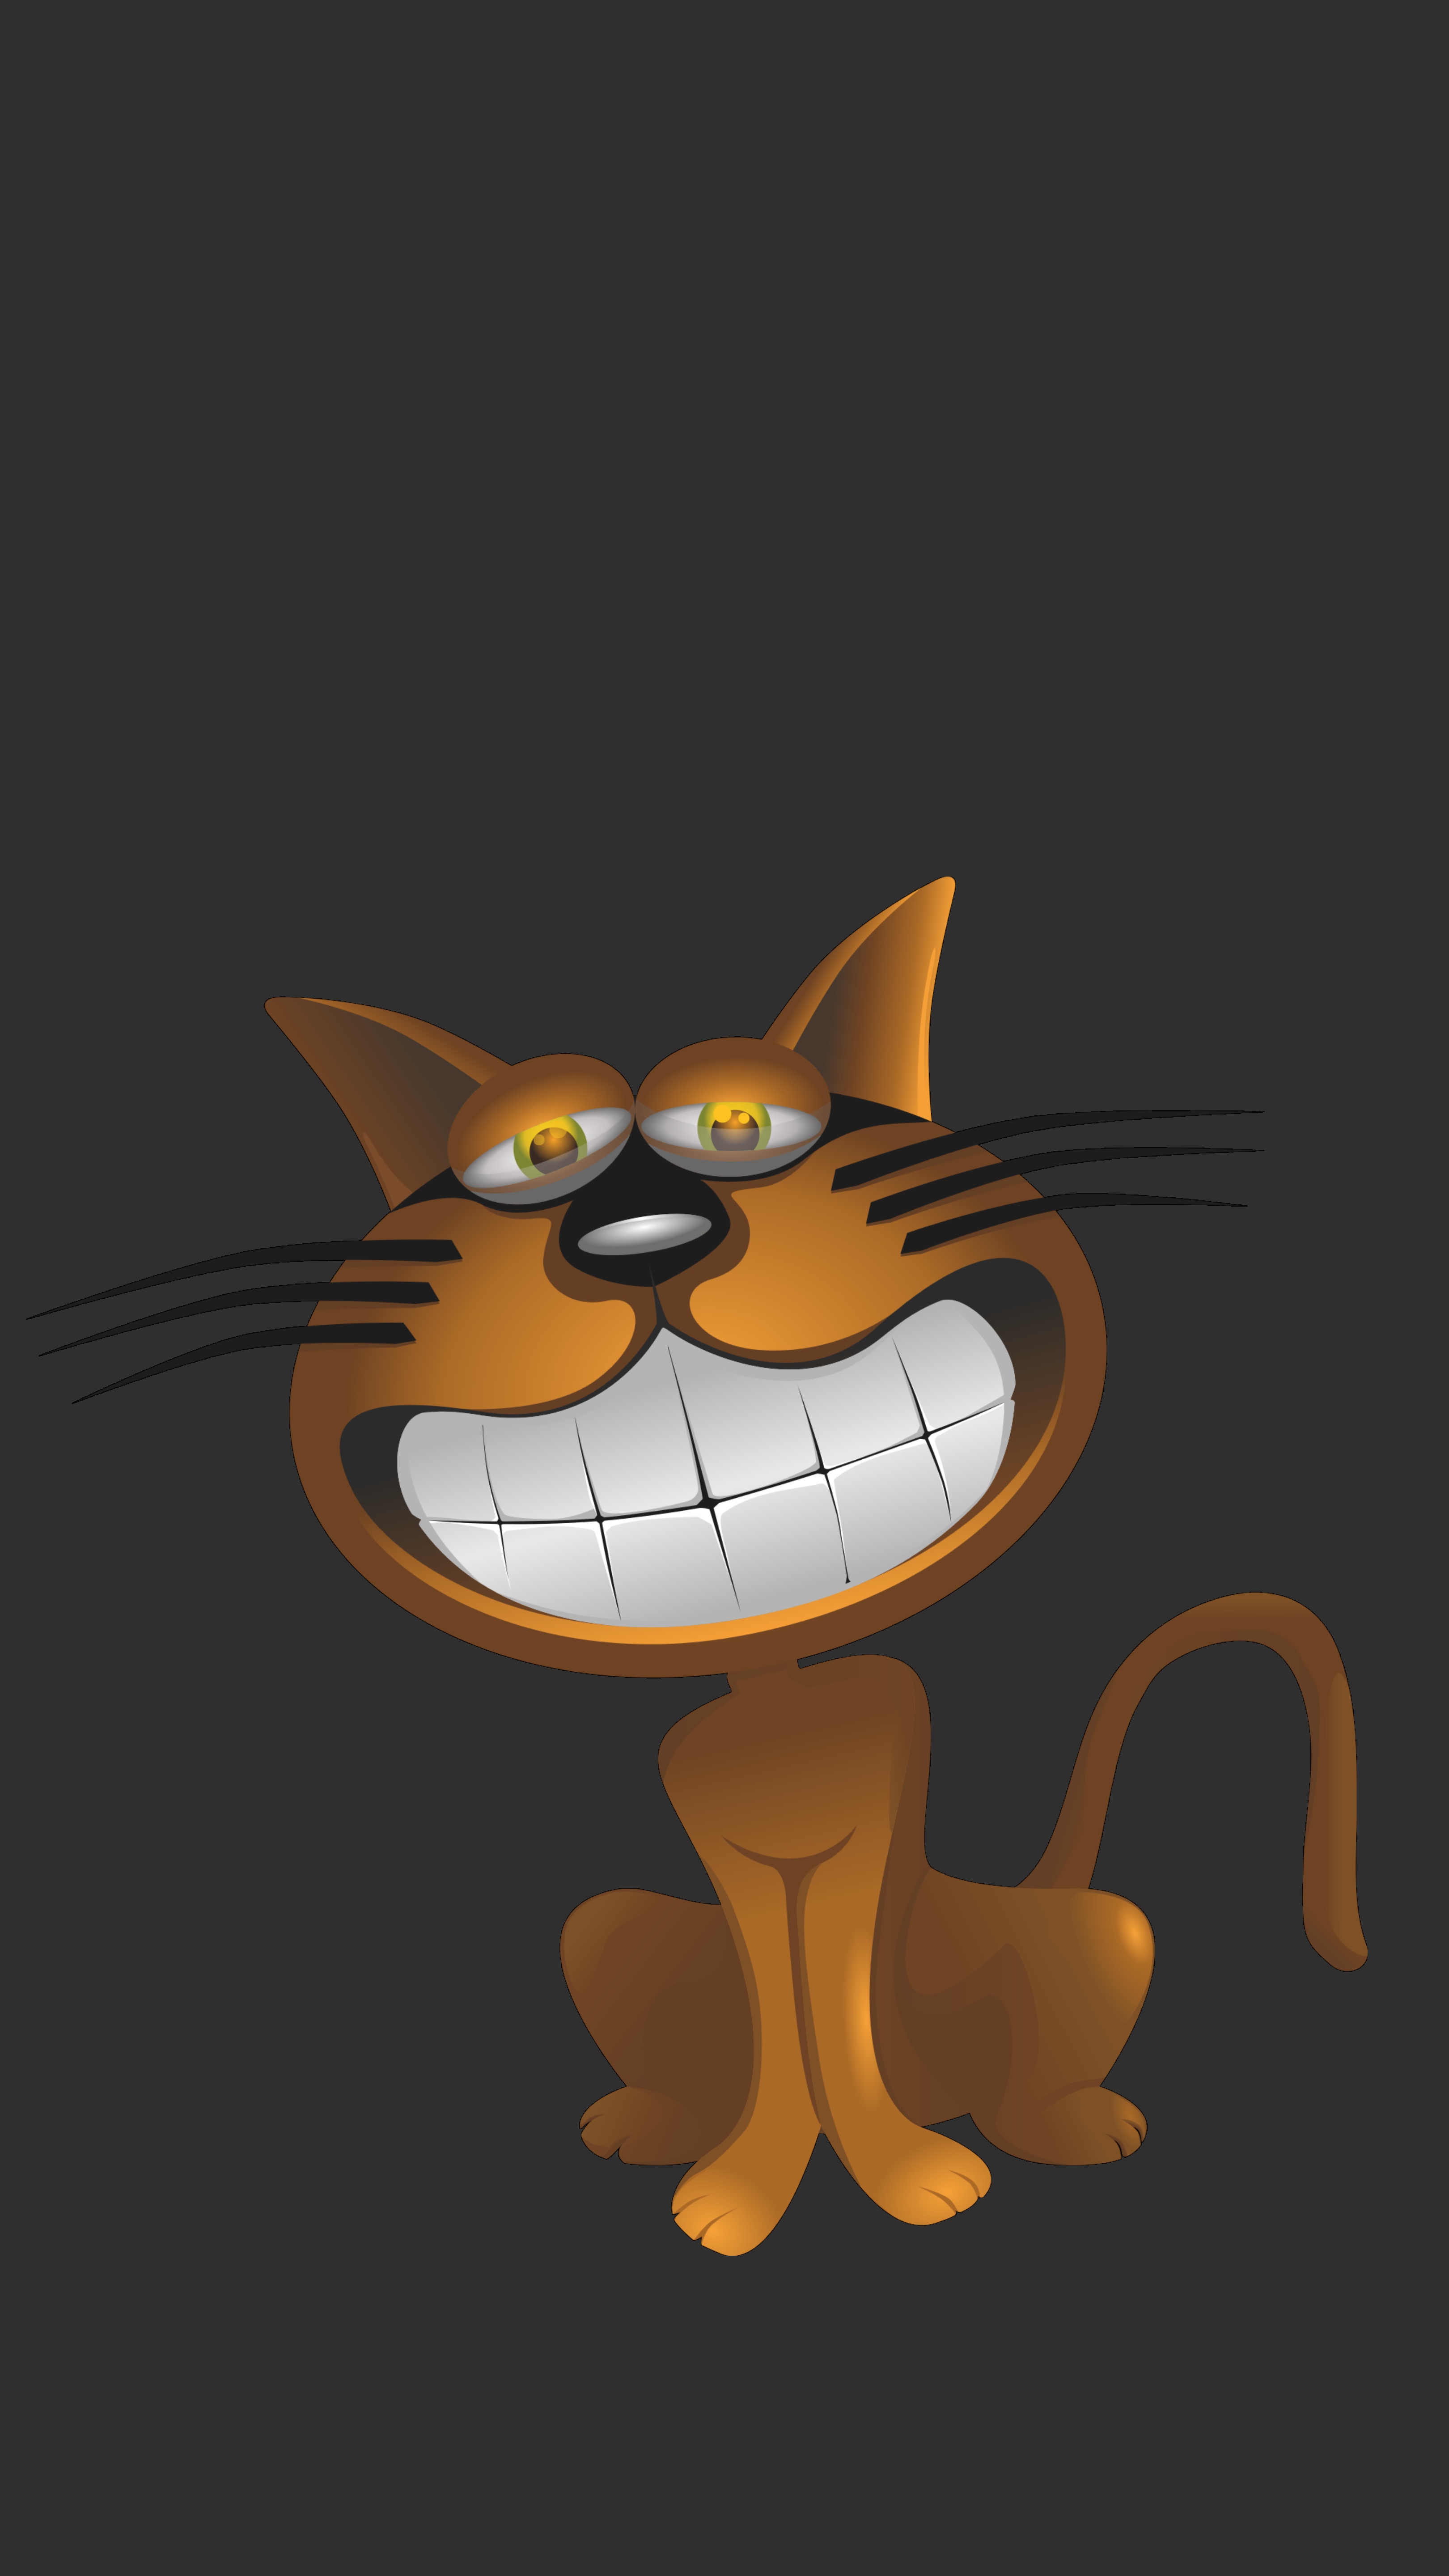 android smile, funny, vector, cat, caricature